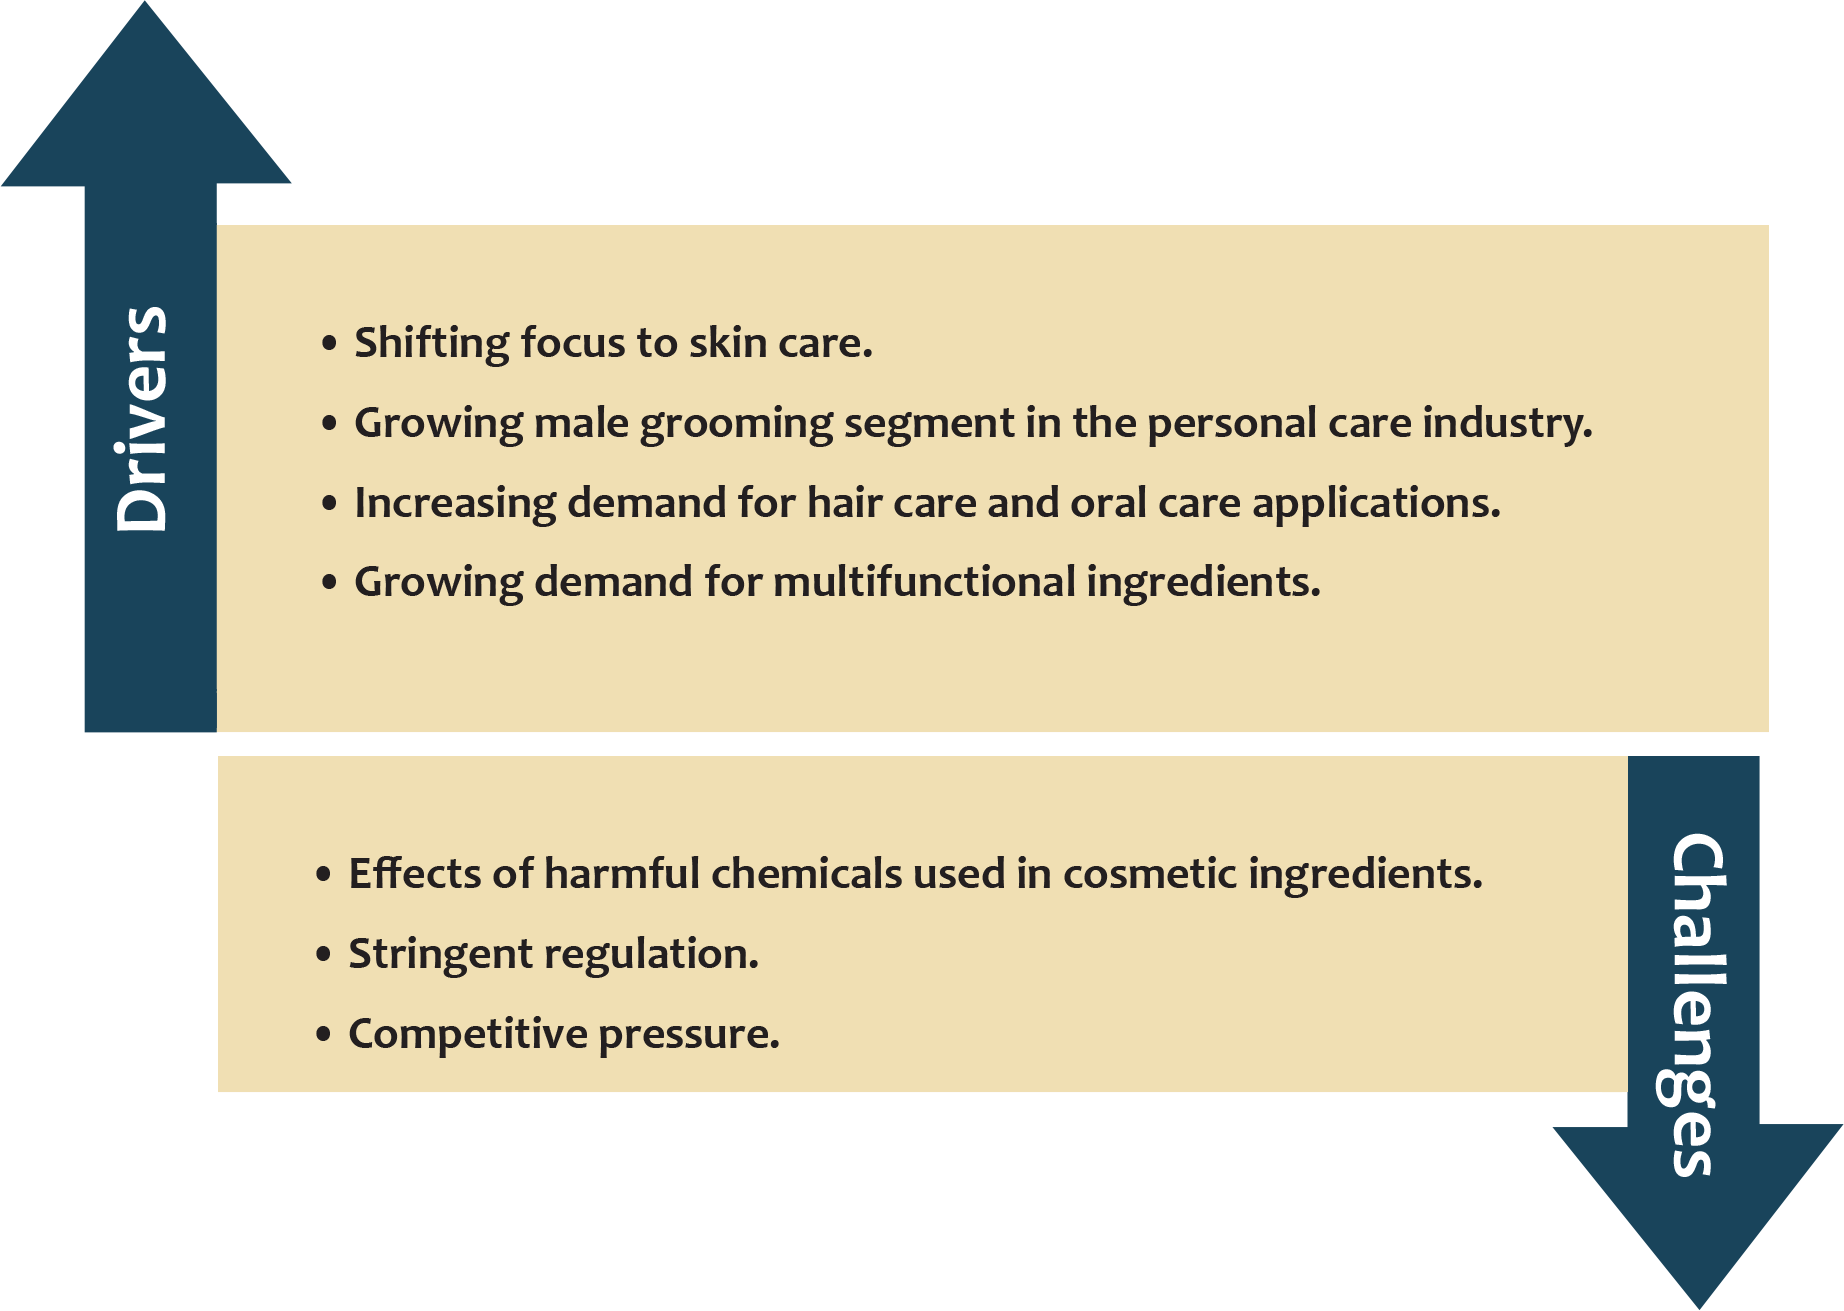 Drivers and challenges in the cosmetic and toiletry ingredient industry